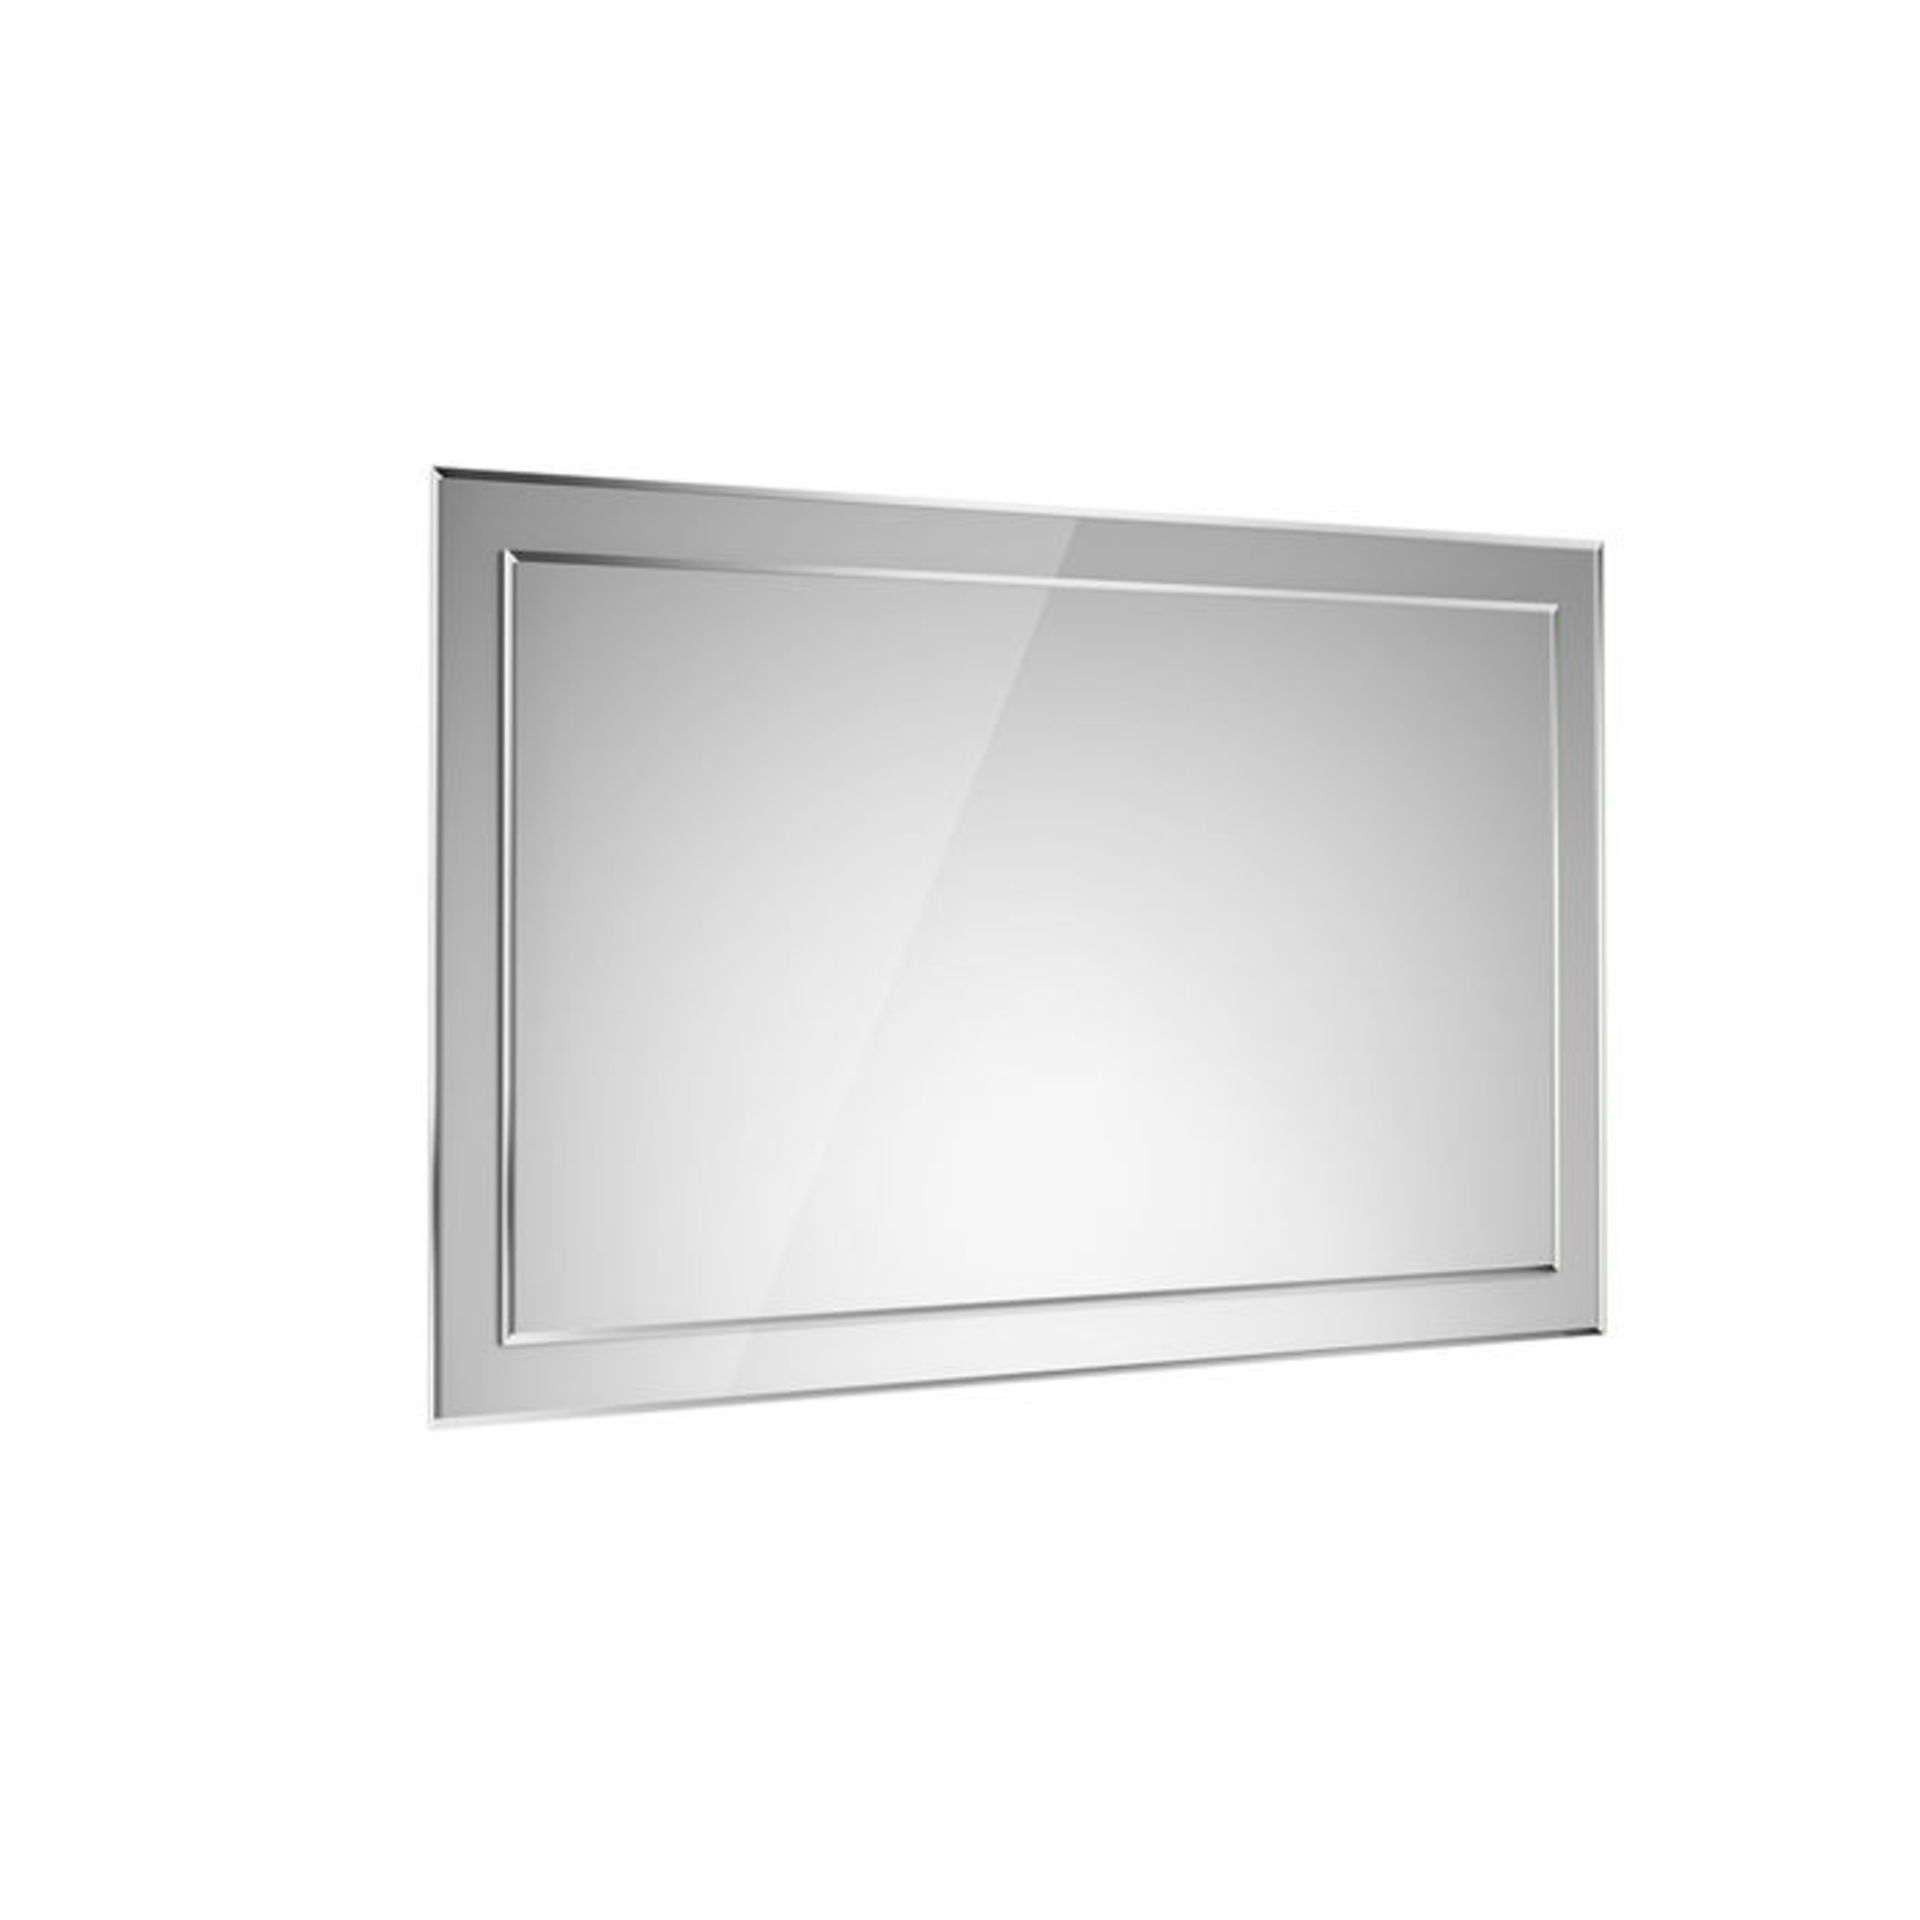 (SA29) 600x1000mm Bevel Mirror Smooth beveled edge for additional safety and style Supplied fully - Image 3 of 3